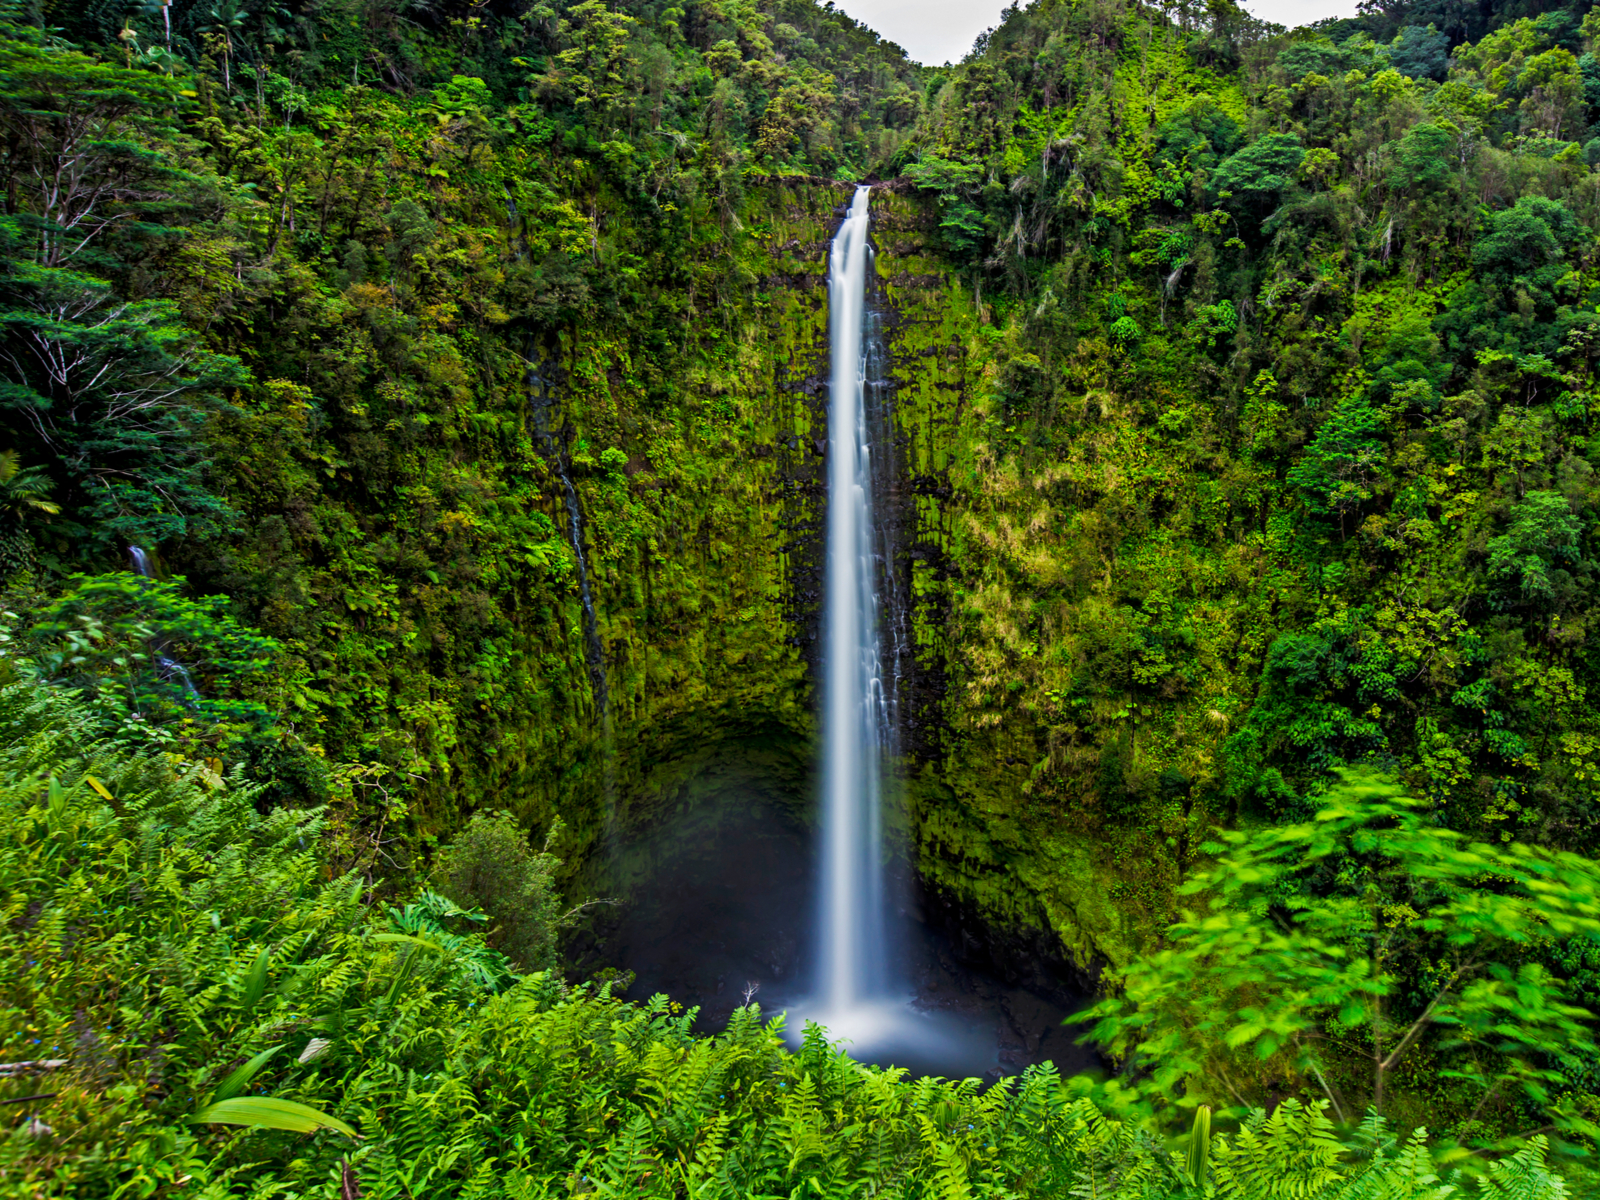 View from the trail of one of the best hikes in Hawaii, the ʻAkaka Falls Loop Trail